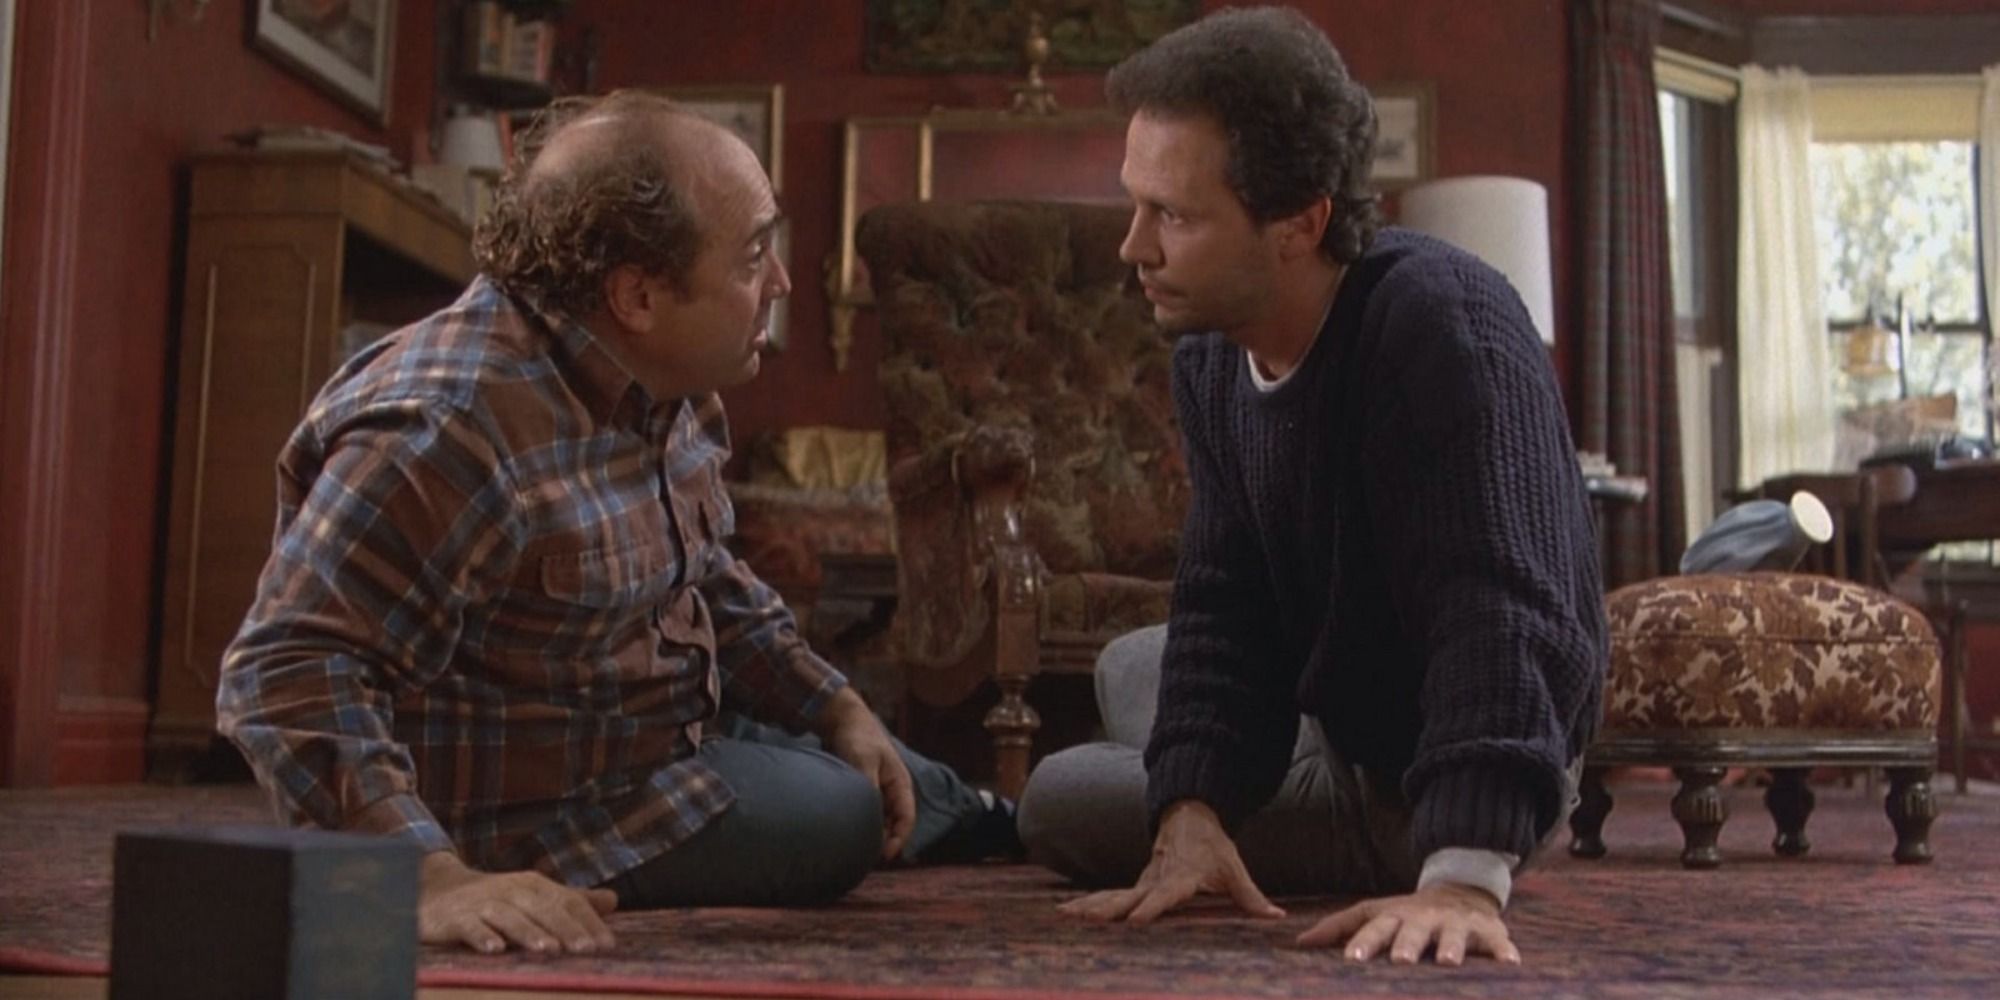 Throw Momma From the Train 1987 Danny DeVito Billy Crystal